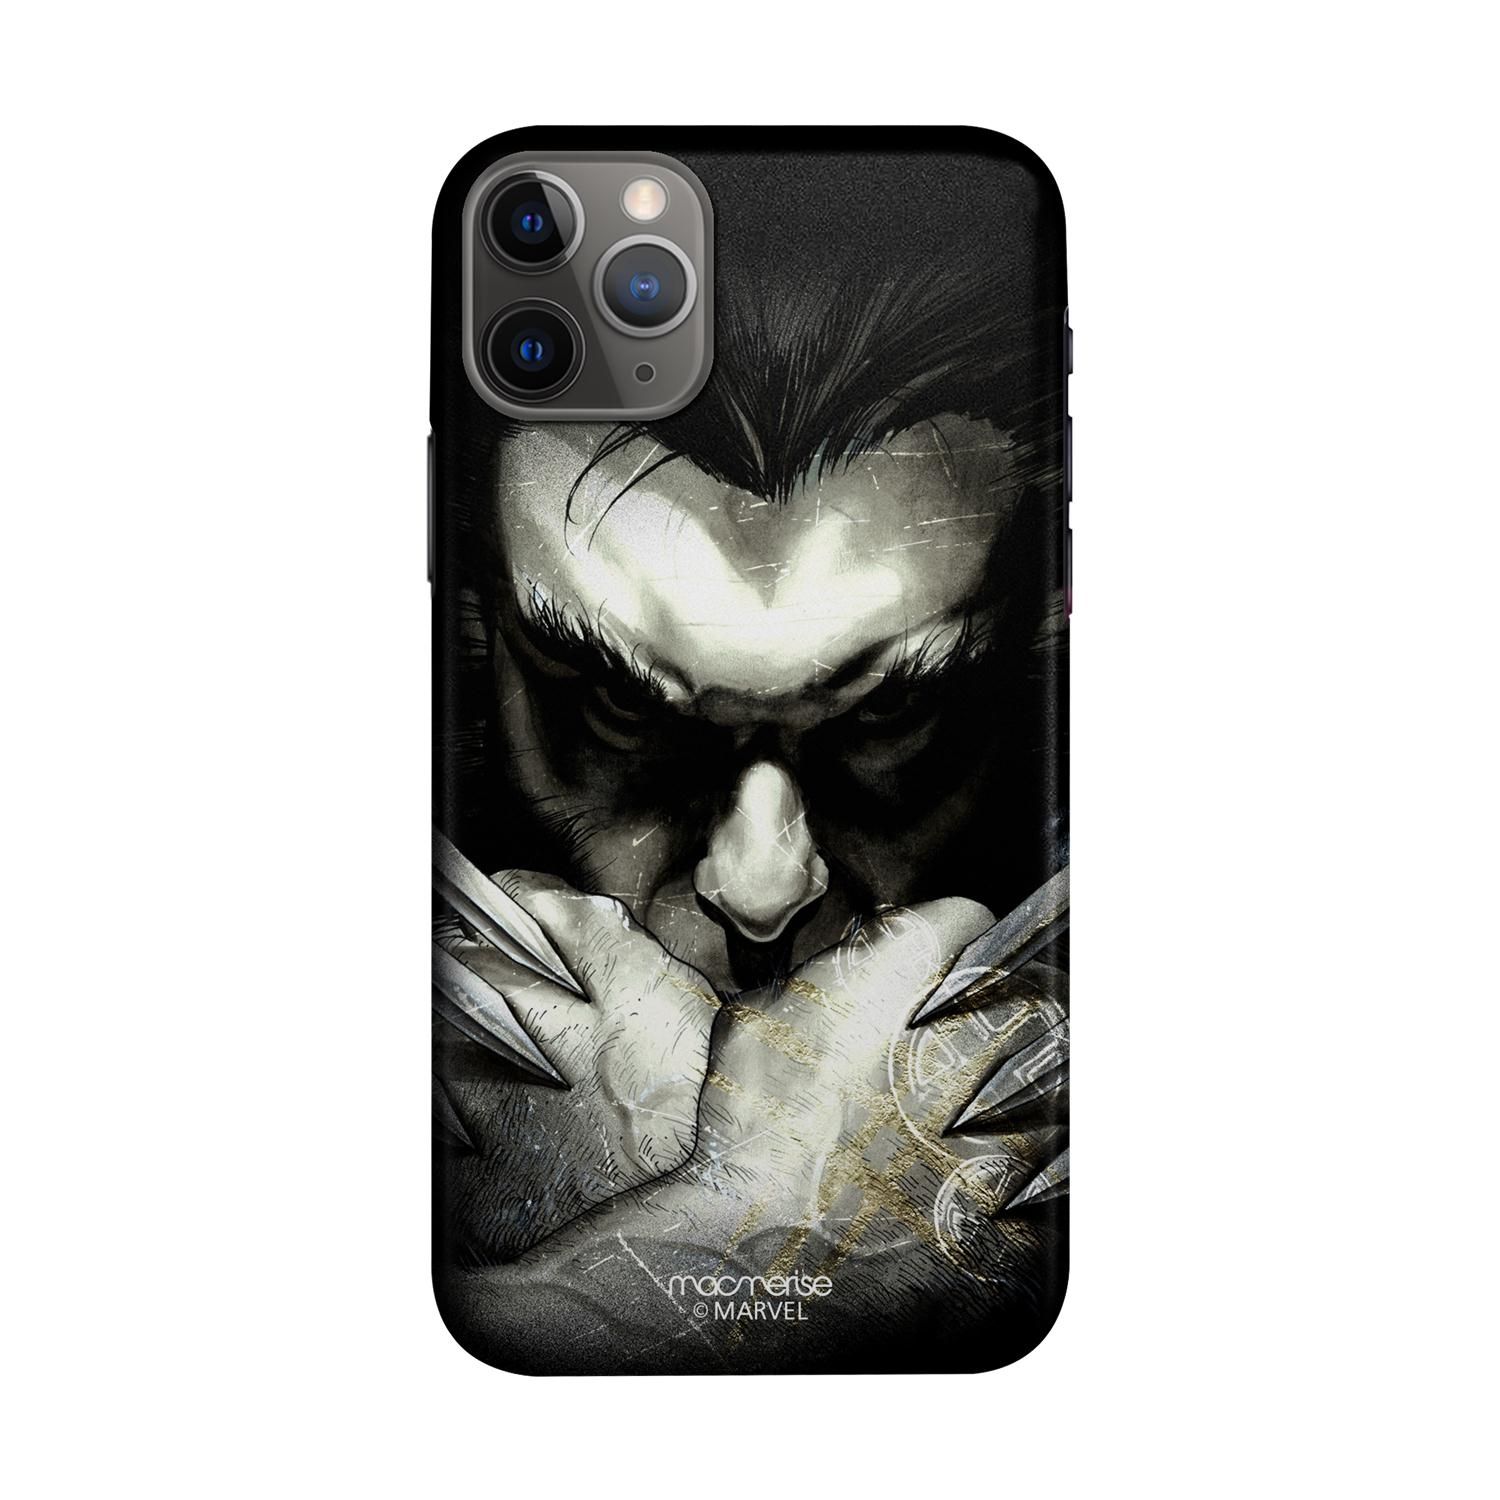 Buy The Dark Claws - Sleek Phone Case for iPhone 11 Pro Max Online